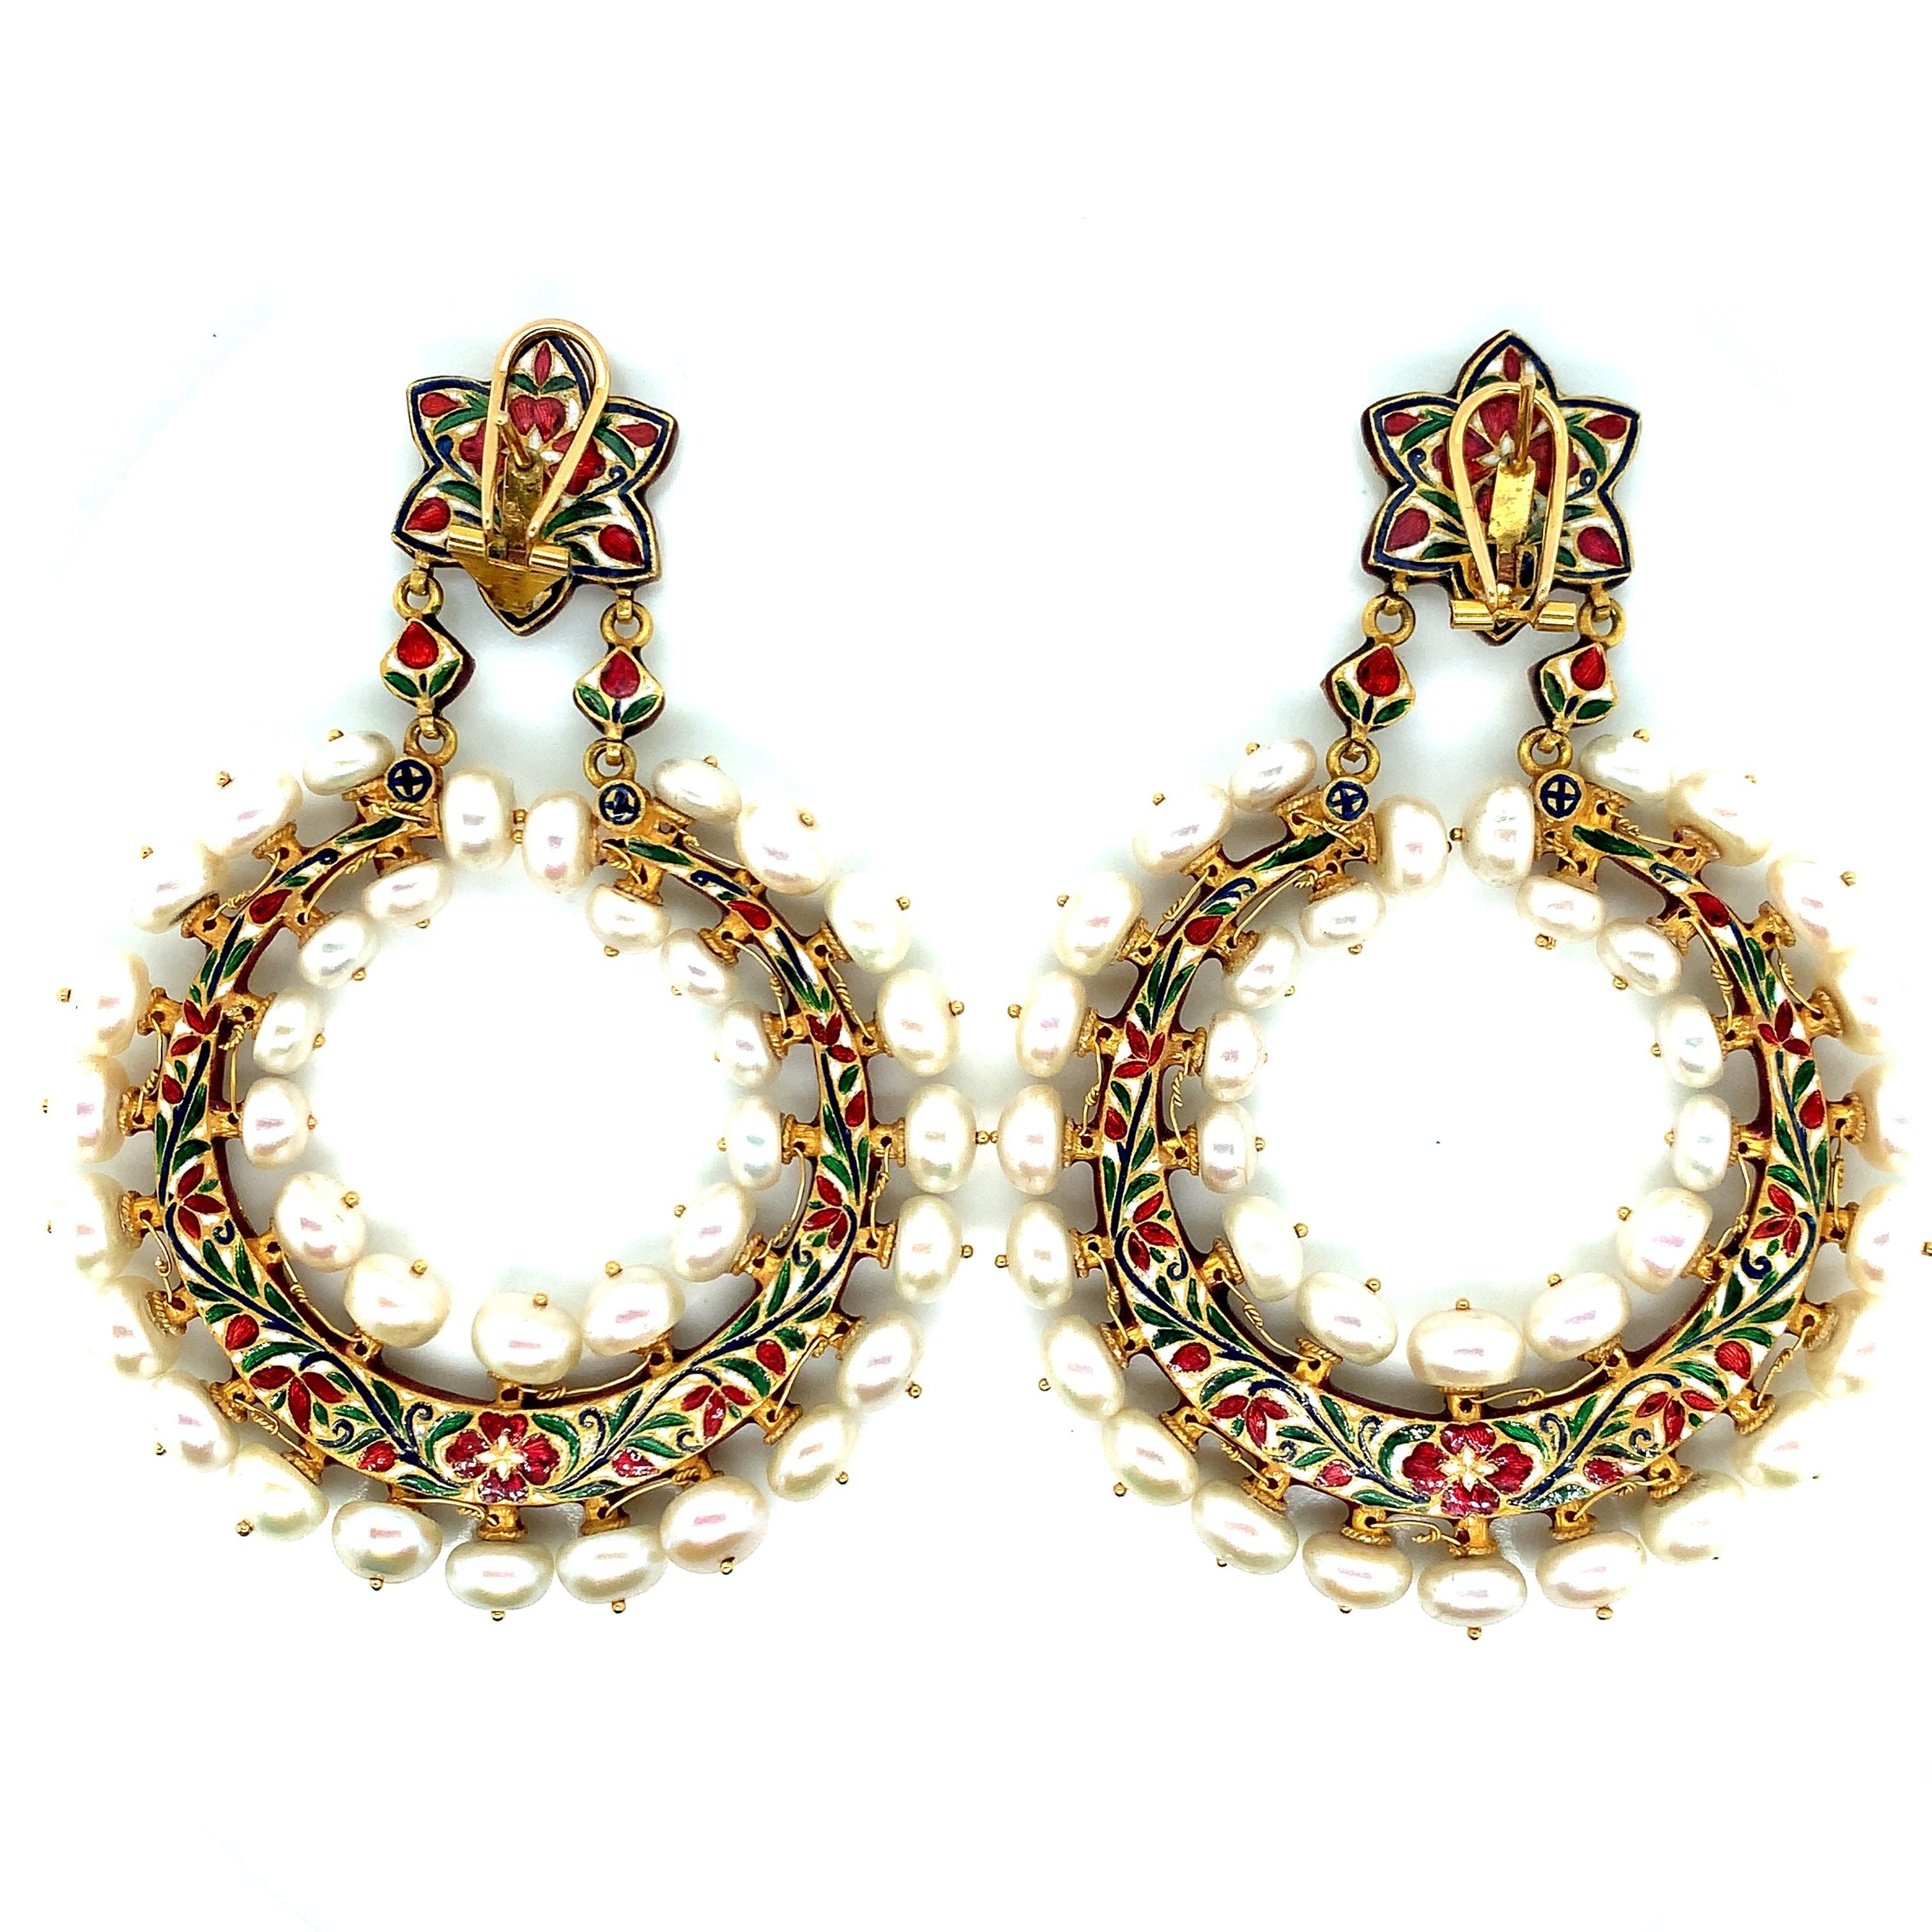 A pair of Indian gold, freshwater pearl, foil-backed diamond, and colorful Jaipur enamel hoop pendant-earrings. The doughnut-shaped freshwater pearls measure approximately 7.5 to 6.0 mm. Total weight: 66.6 grams. Width: 2.63 inches. Length: 3.5